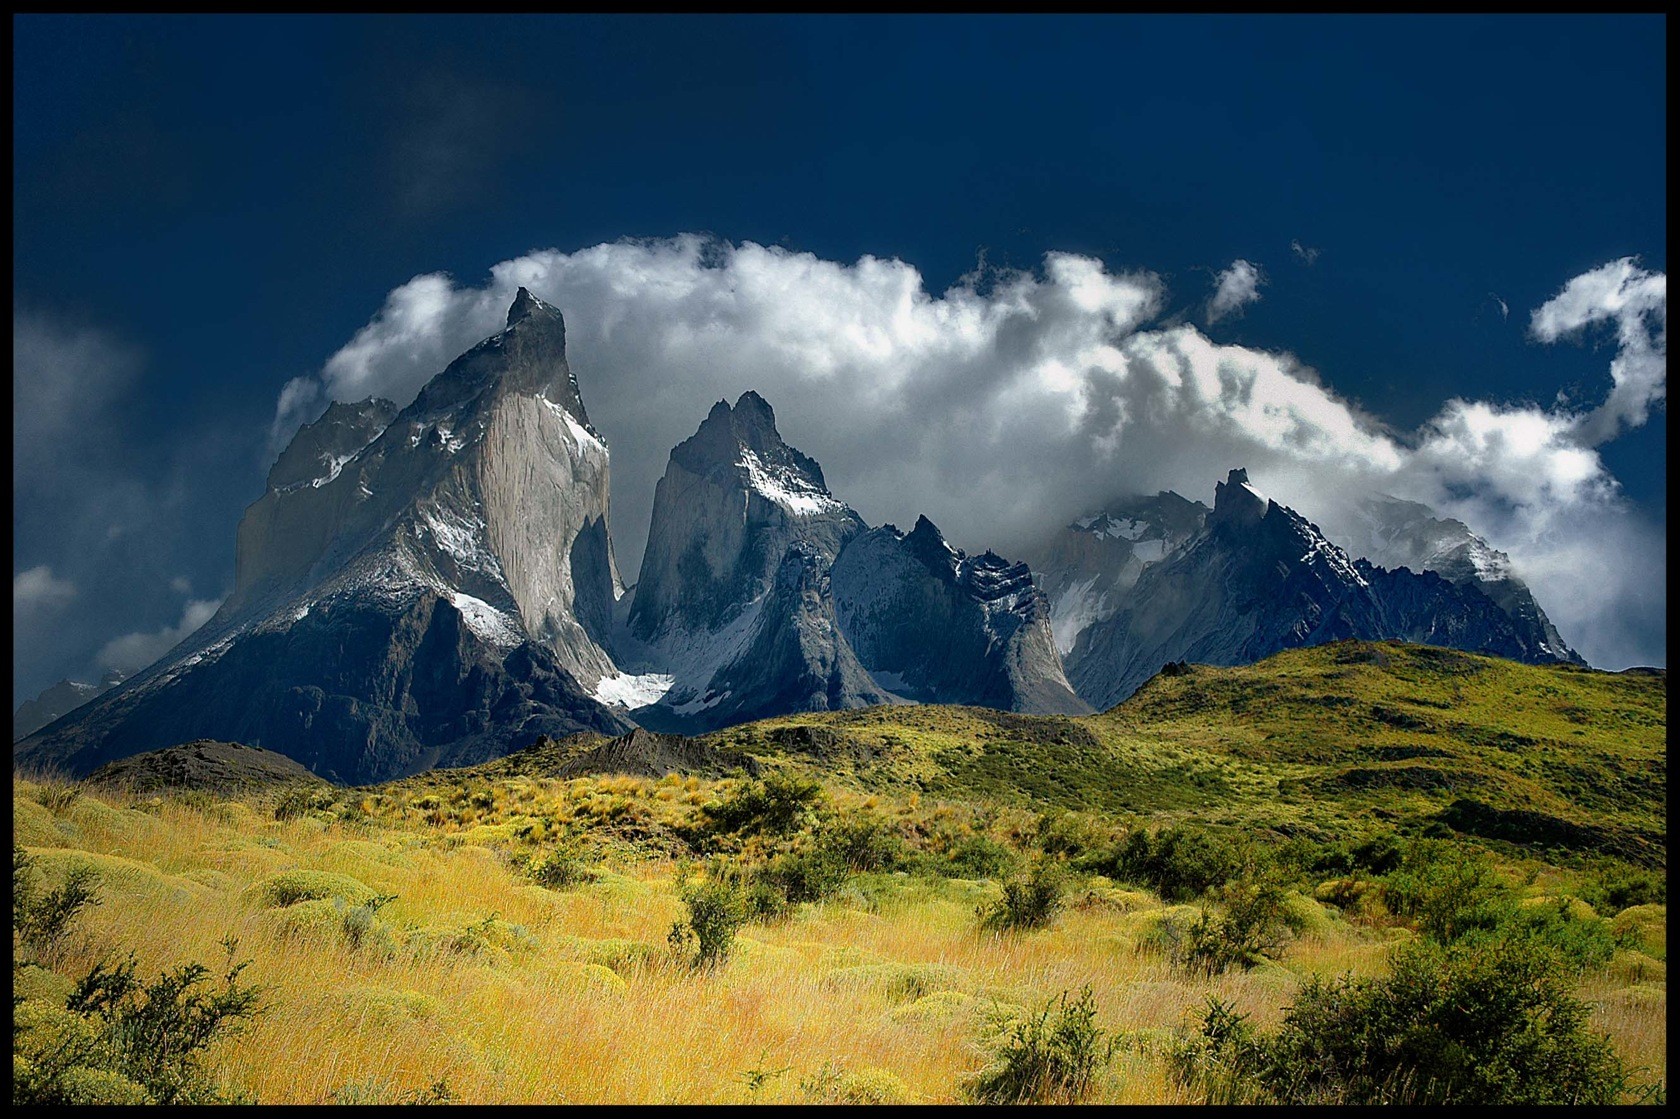 General 1680x1119 mountains Chile nature clouds landscape Torres del Paine Patagonia